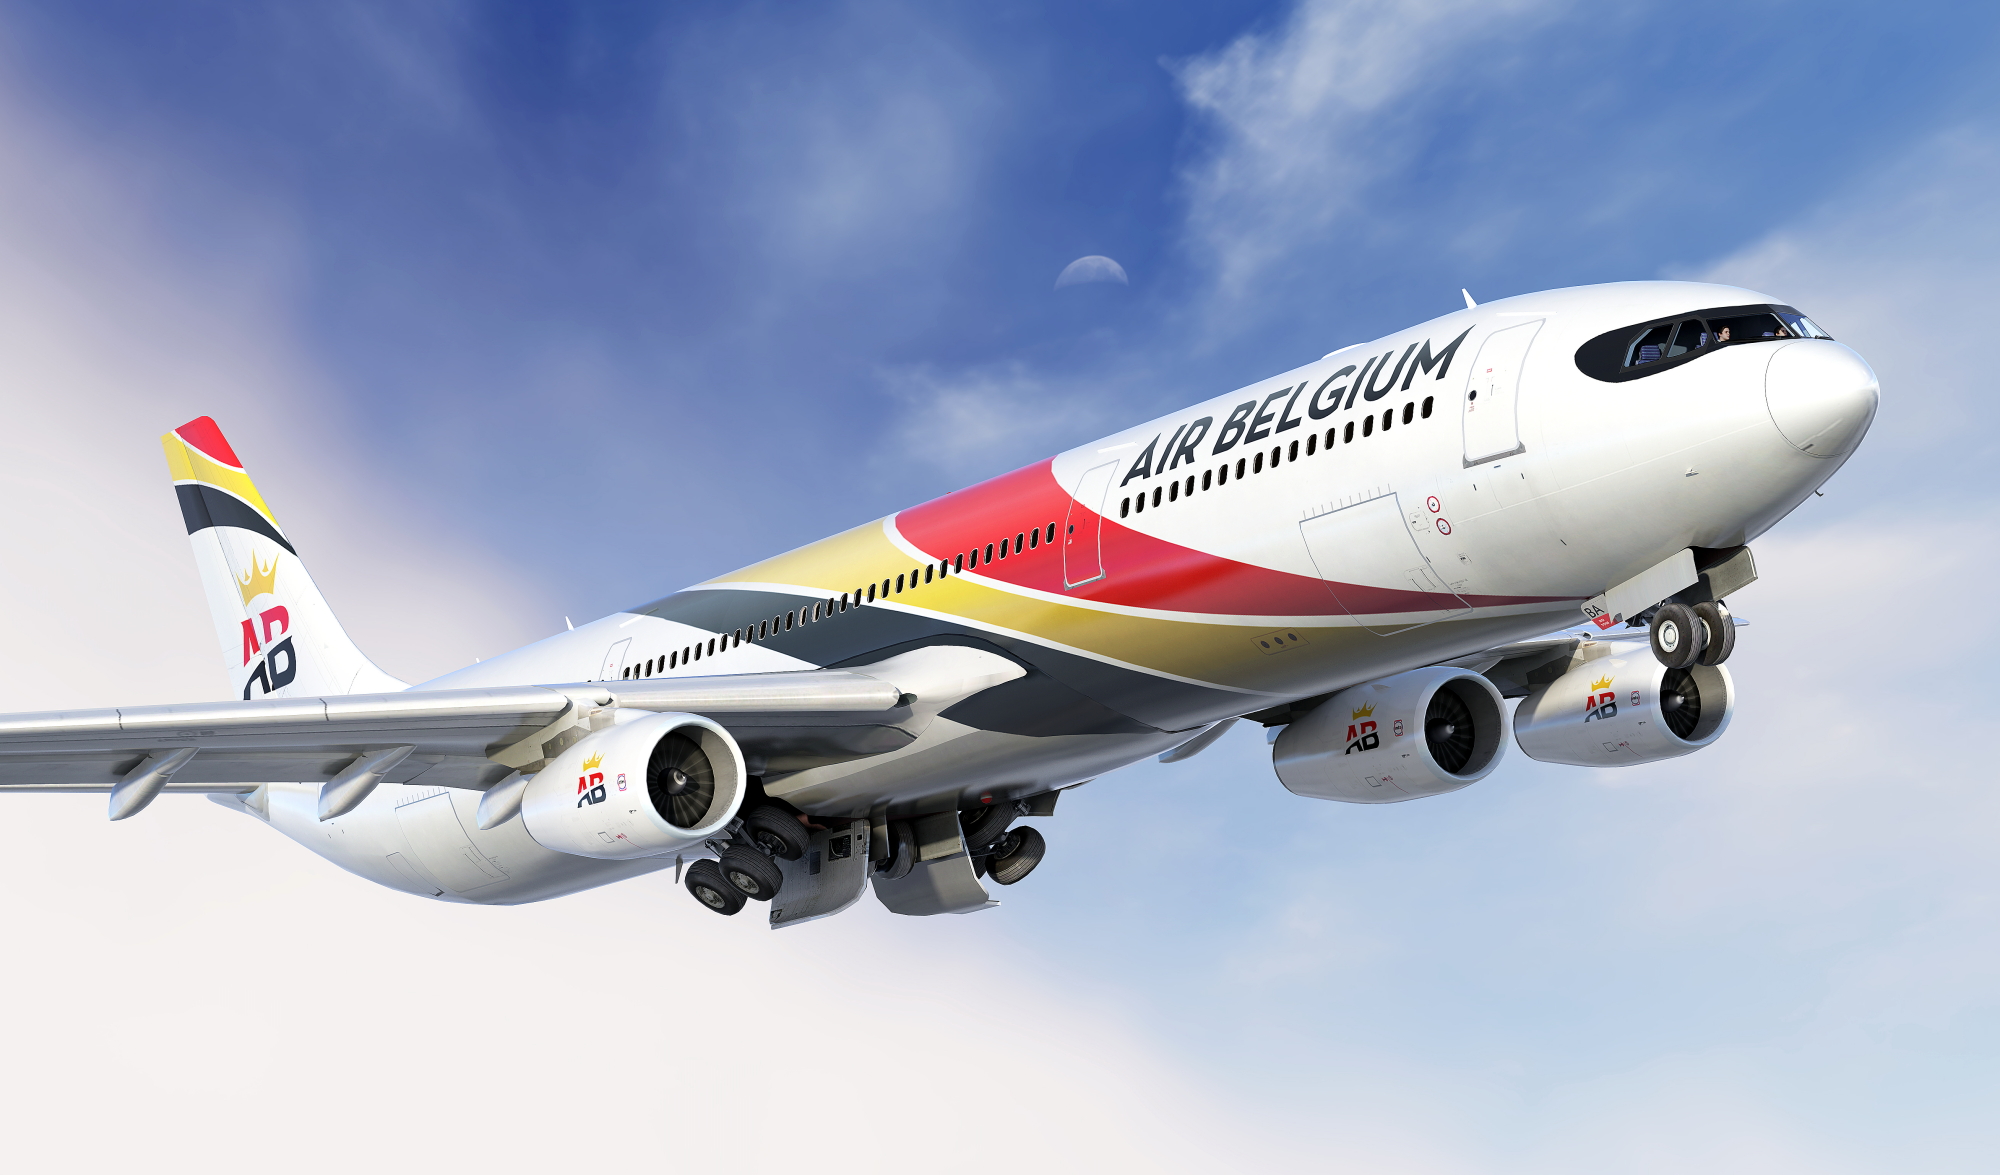 Air Belgium, a new airline, has unveiled plans to launch direct flights between Brussels South Airport and Hong Kong. The official launch of the airline will be in March in Hong Kong, after all the required operating licenses have been finalised. Click to enlarge.